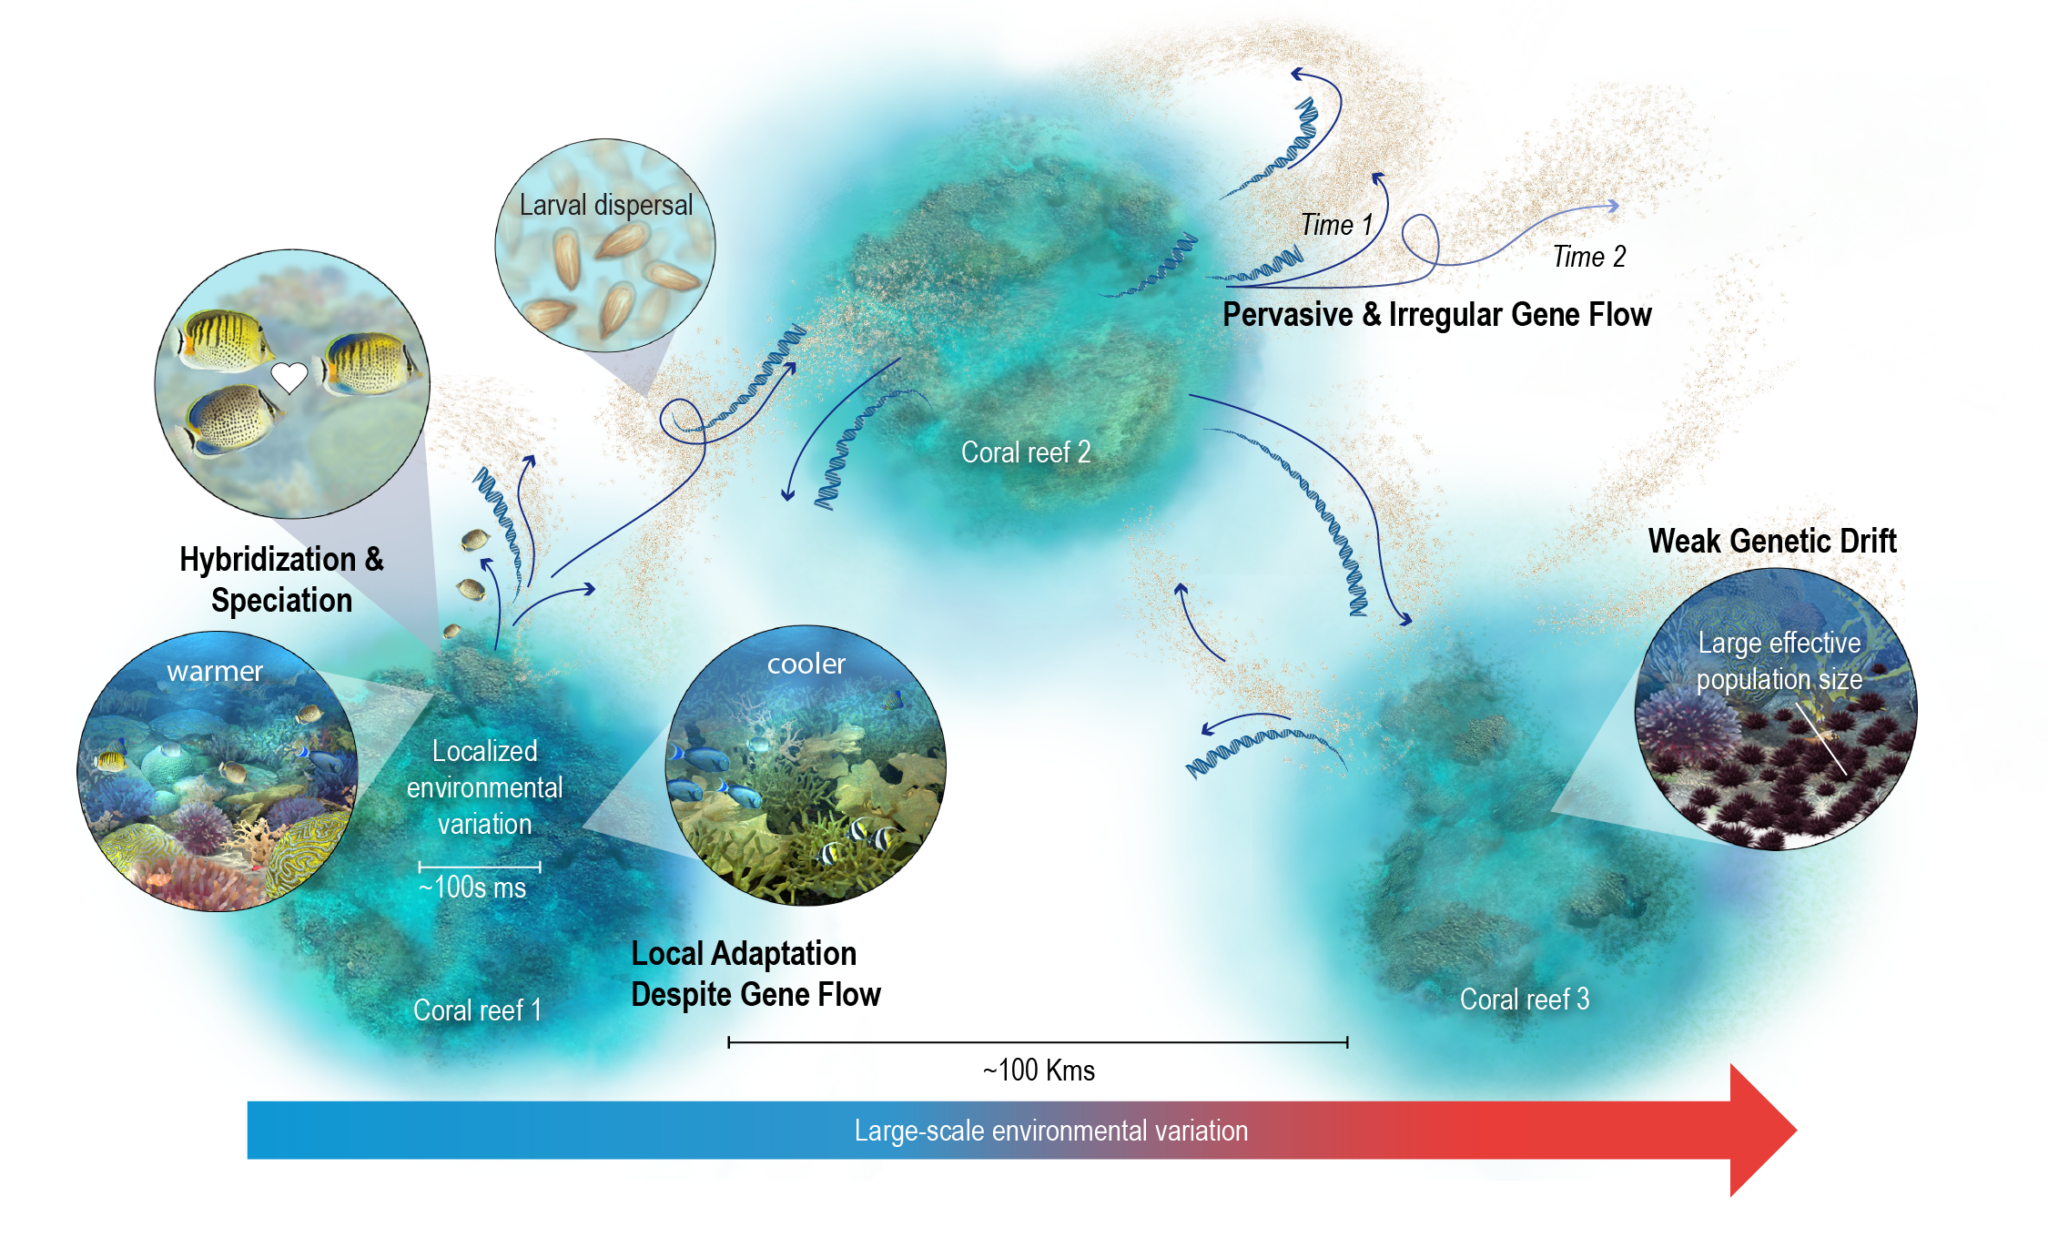 Scientific visualization of genetic drift of coral polyps shown in various coral reef ecosystems, SayoStudio.